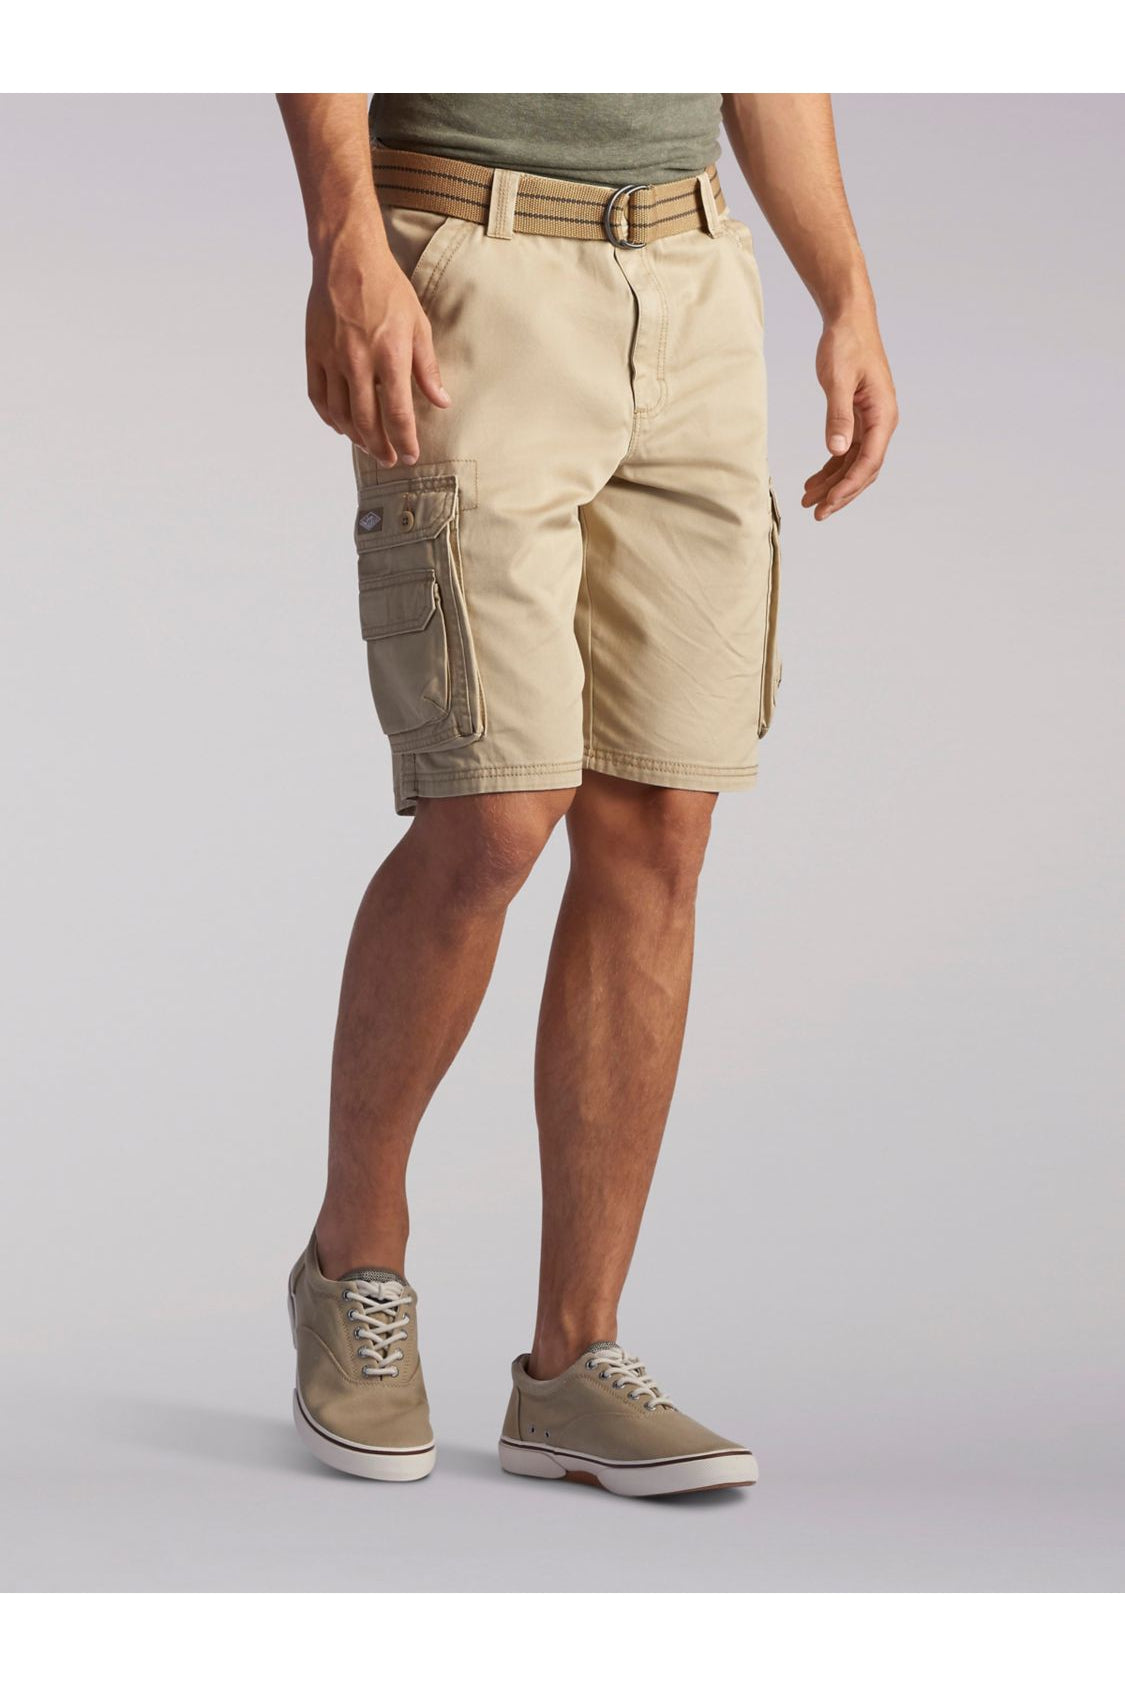 Big and Tall Wyoming Cargo Short in Buff from Front View